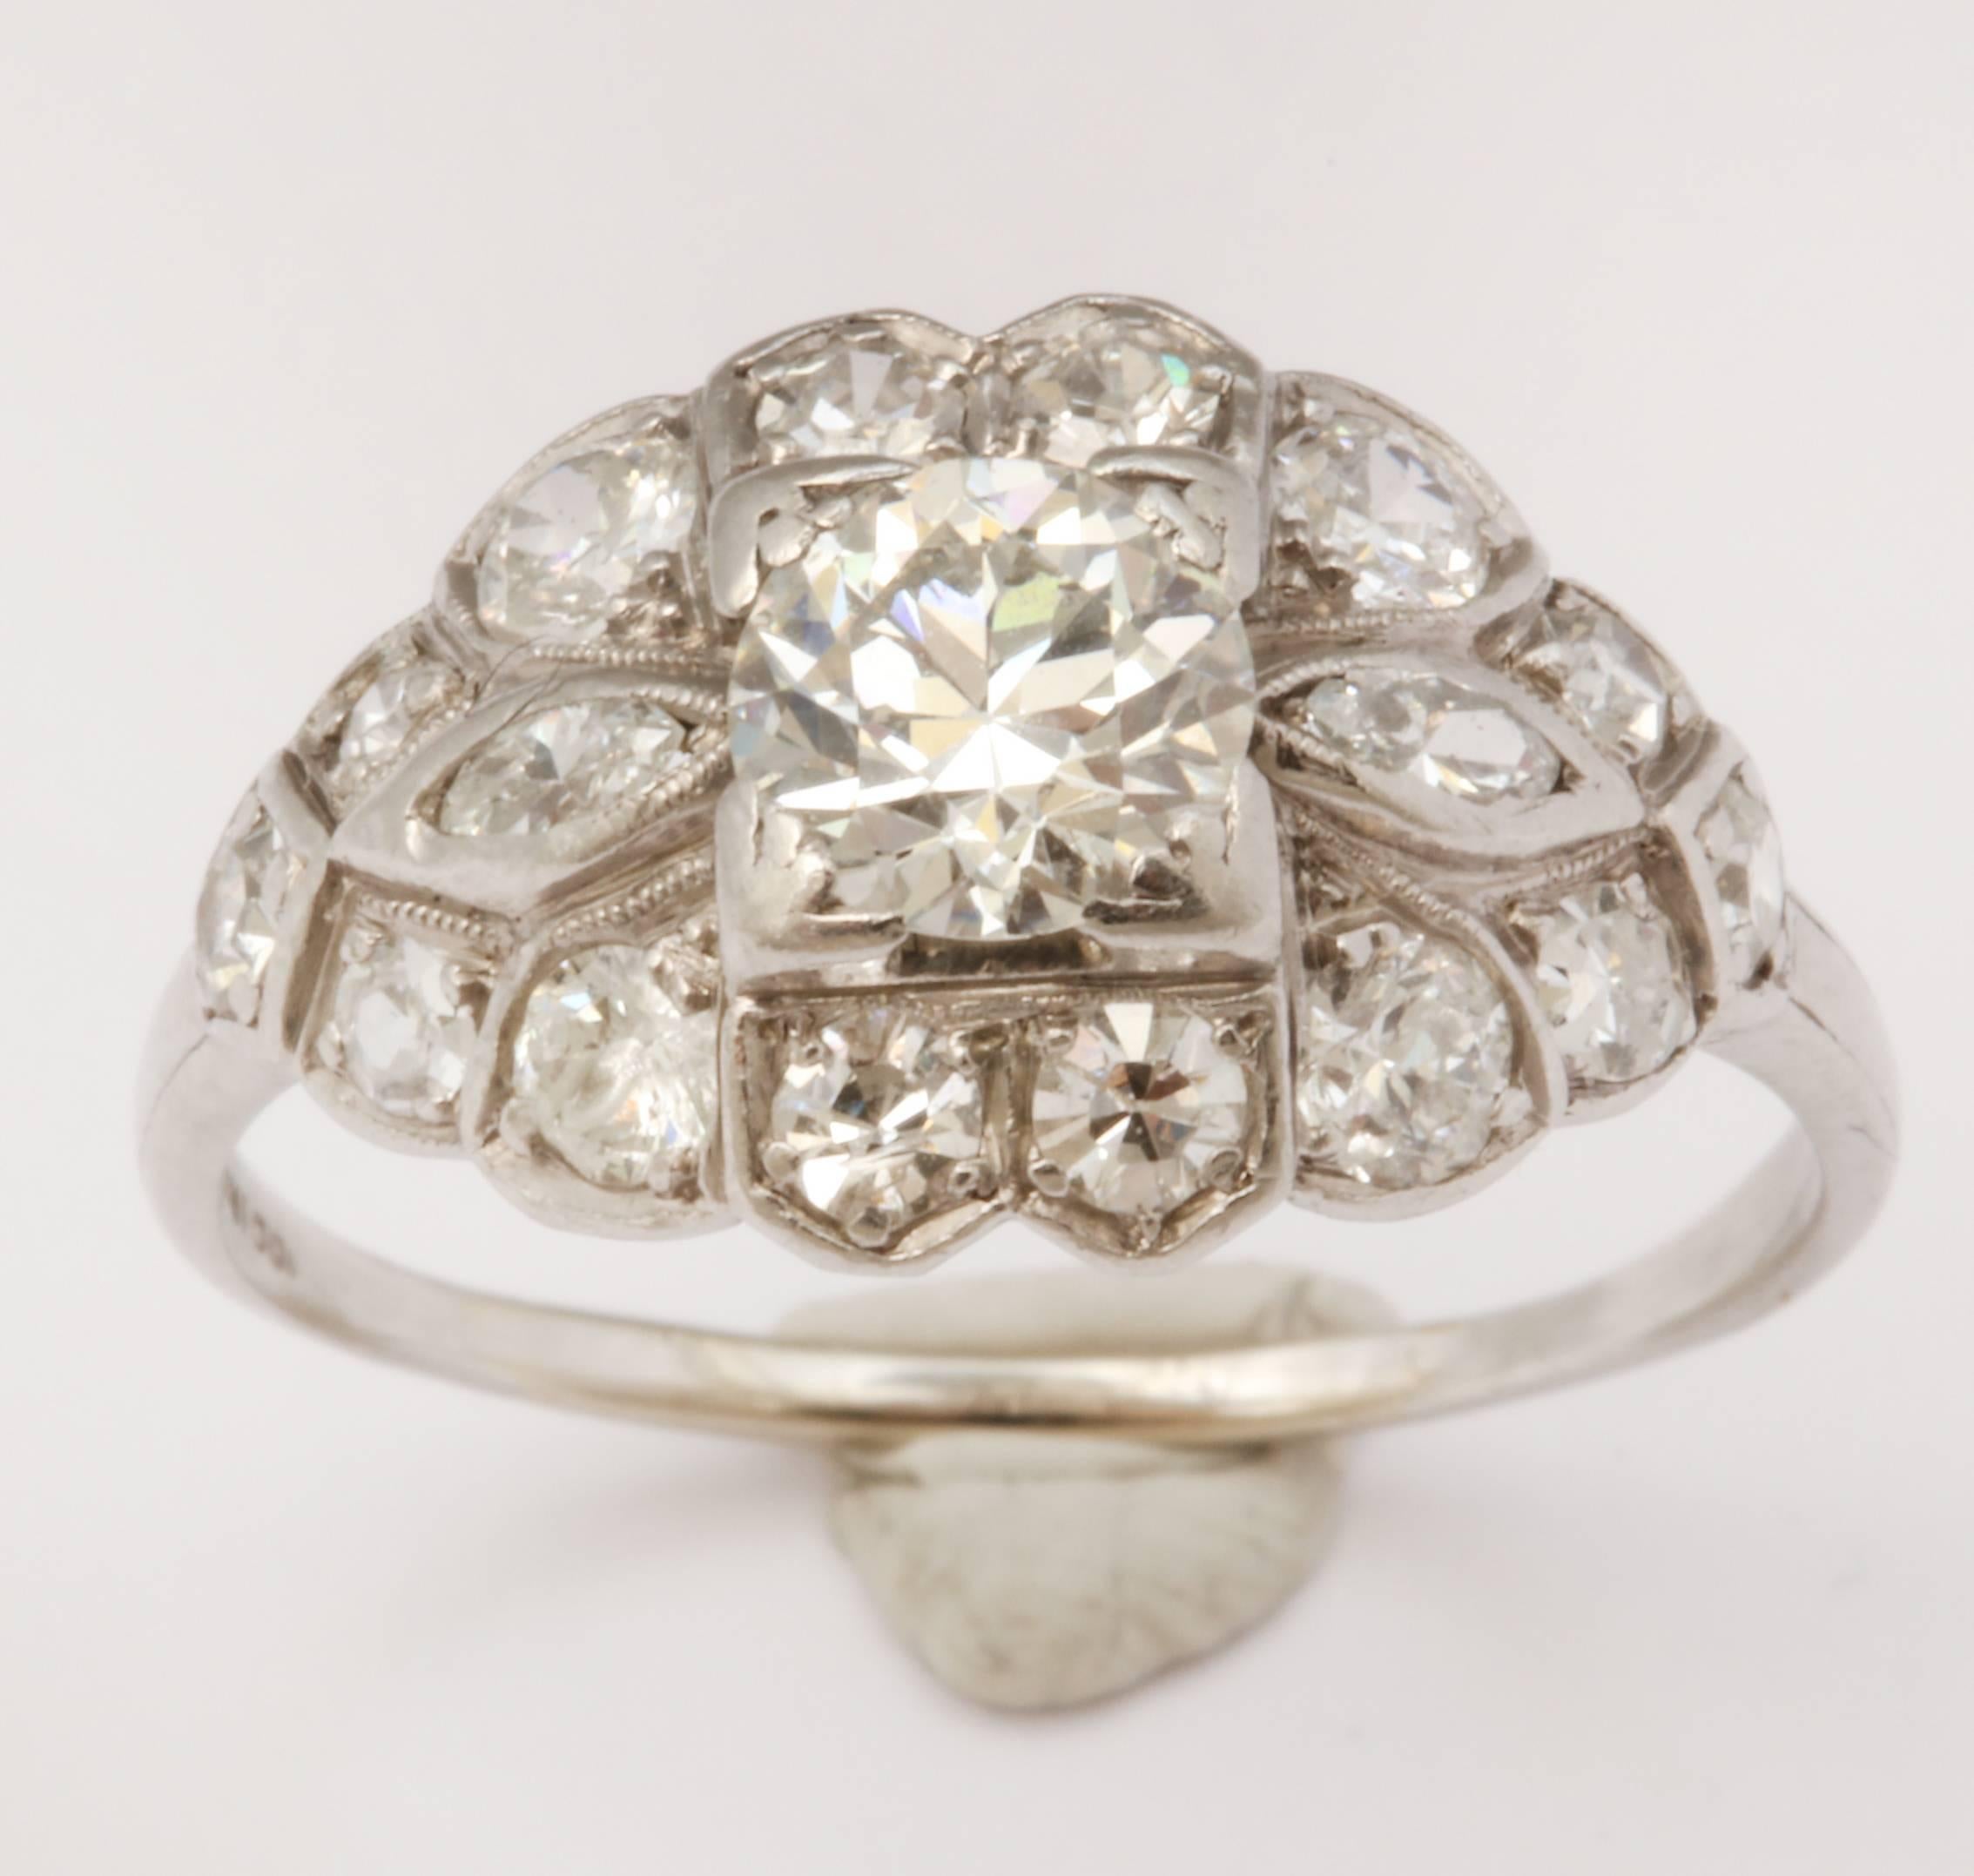 Beautiful navette shaped Art Deco engagement ring. The ring is platinum with .70ct Old European cut center stone. The center stone is prong set and surrounded by 16 Old European cut stones. EGL certified: G-H, VS2. 